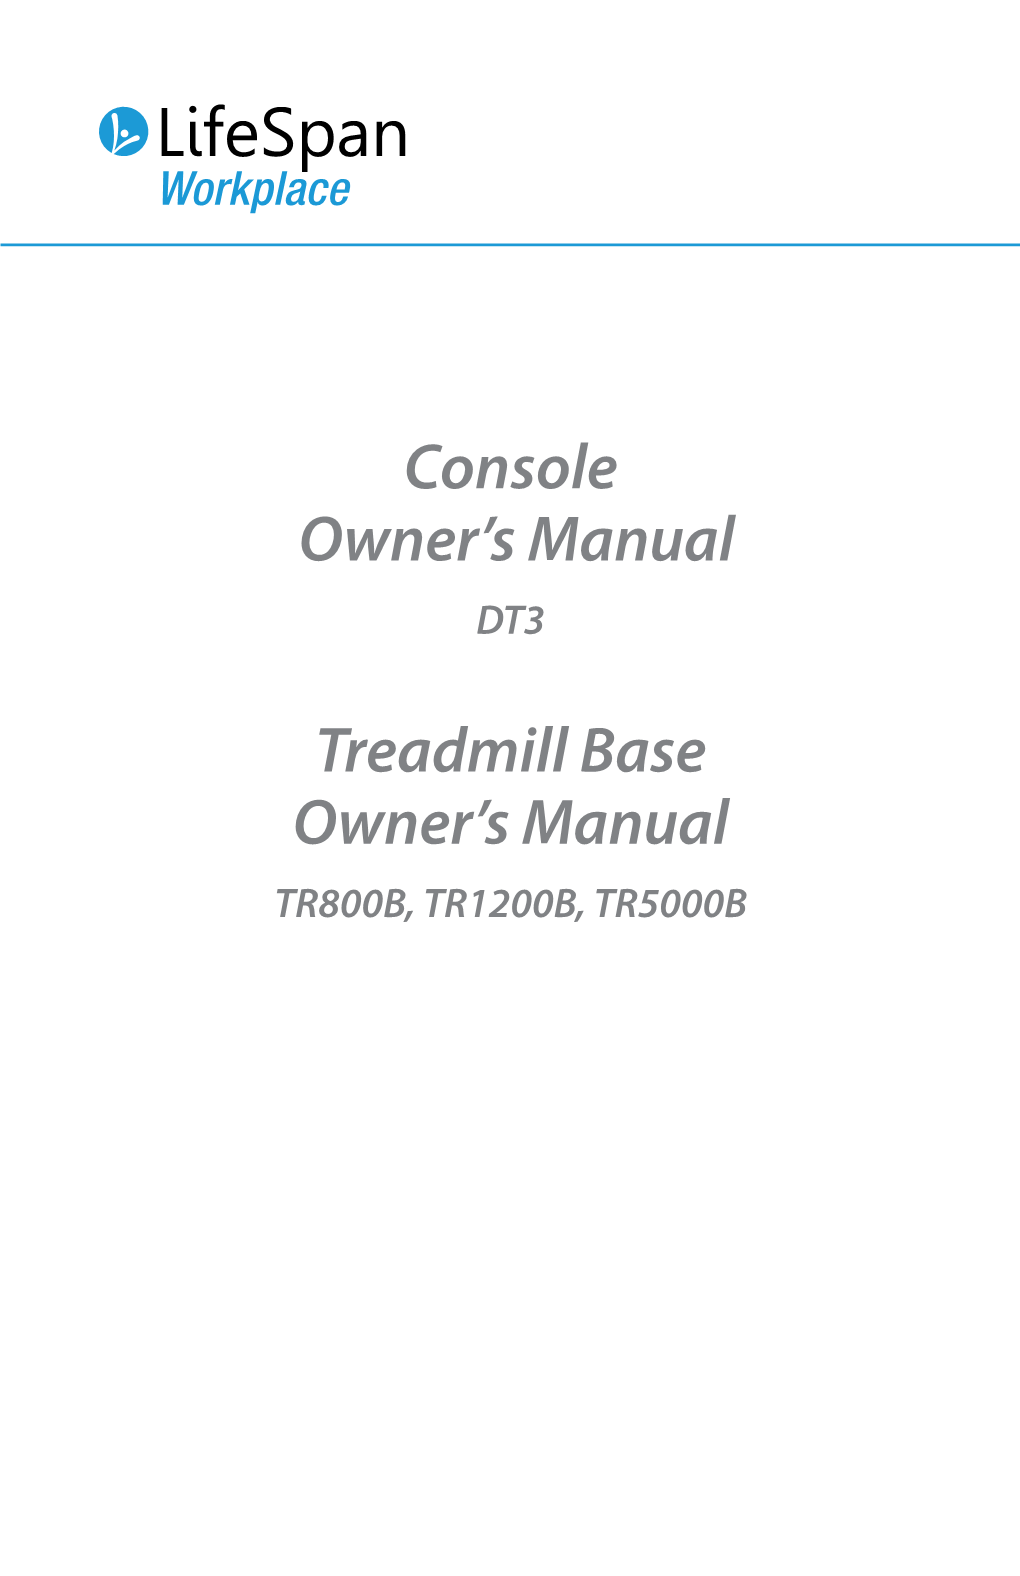 Console Owner's Manual Treadmill Base Owner's Manual